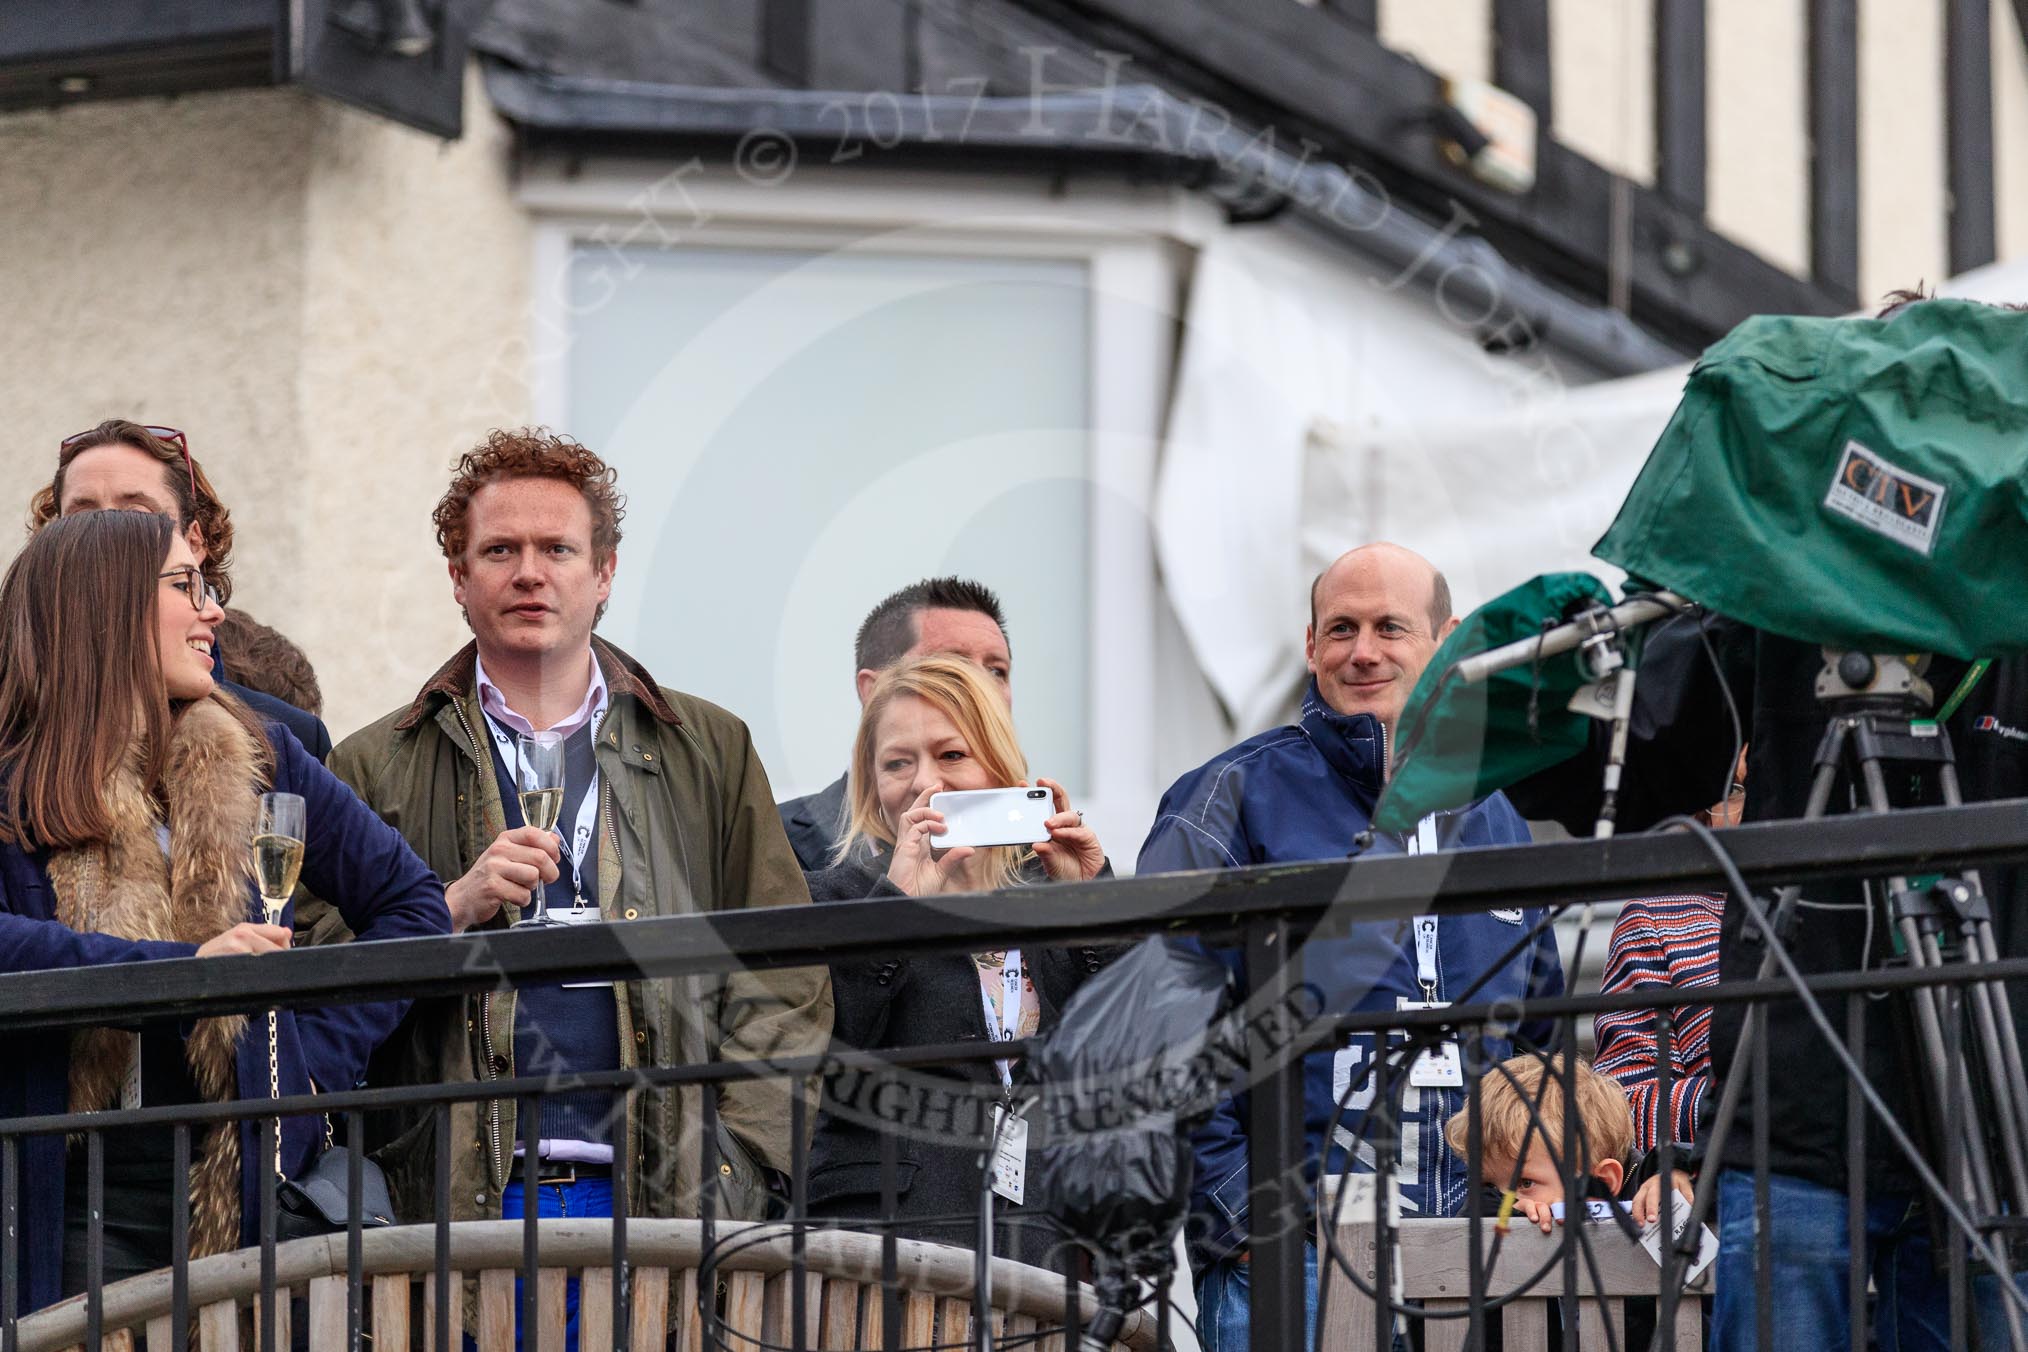 The Cancer Research UK Women's Boat Race 2018: Spectators on the balcony of Mortlake Boat Club, waiting for the price giving.
River Thames between Putney Bridge and Mortlake,
London SW15,

United Kingdom,
on 24 March 2018 at 16:59, image #229